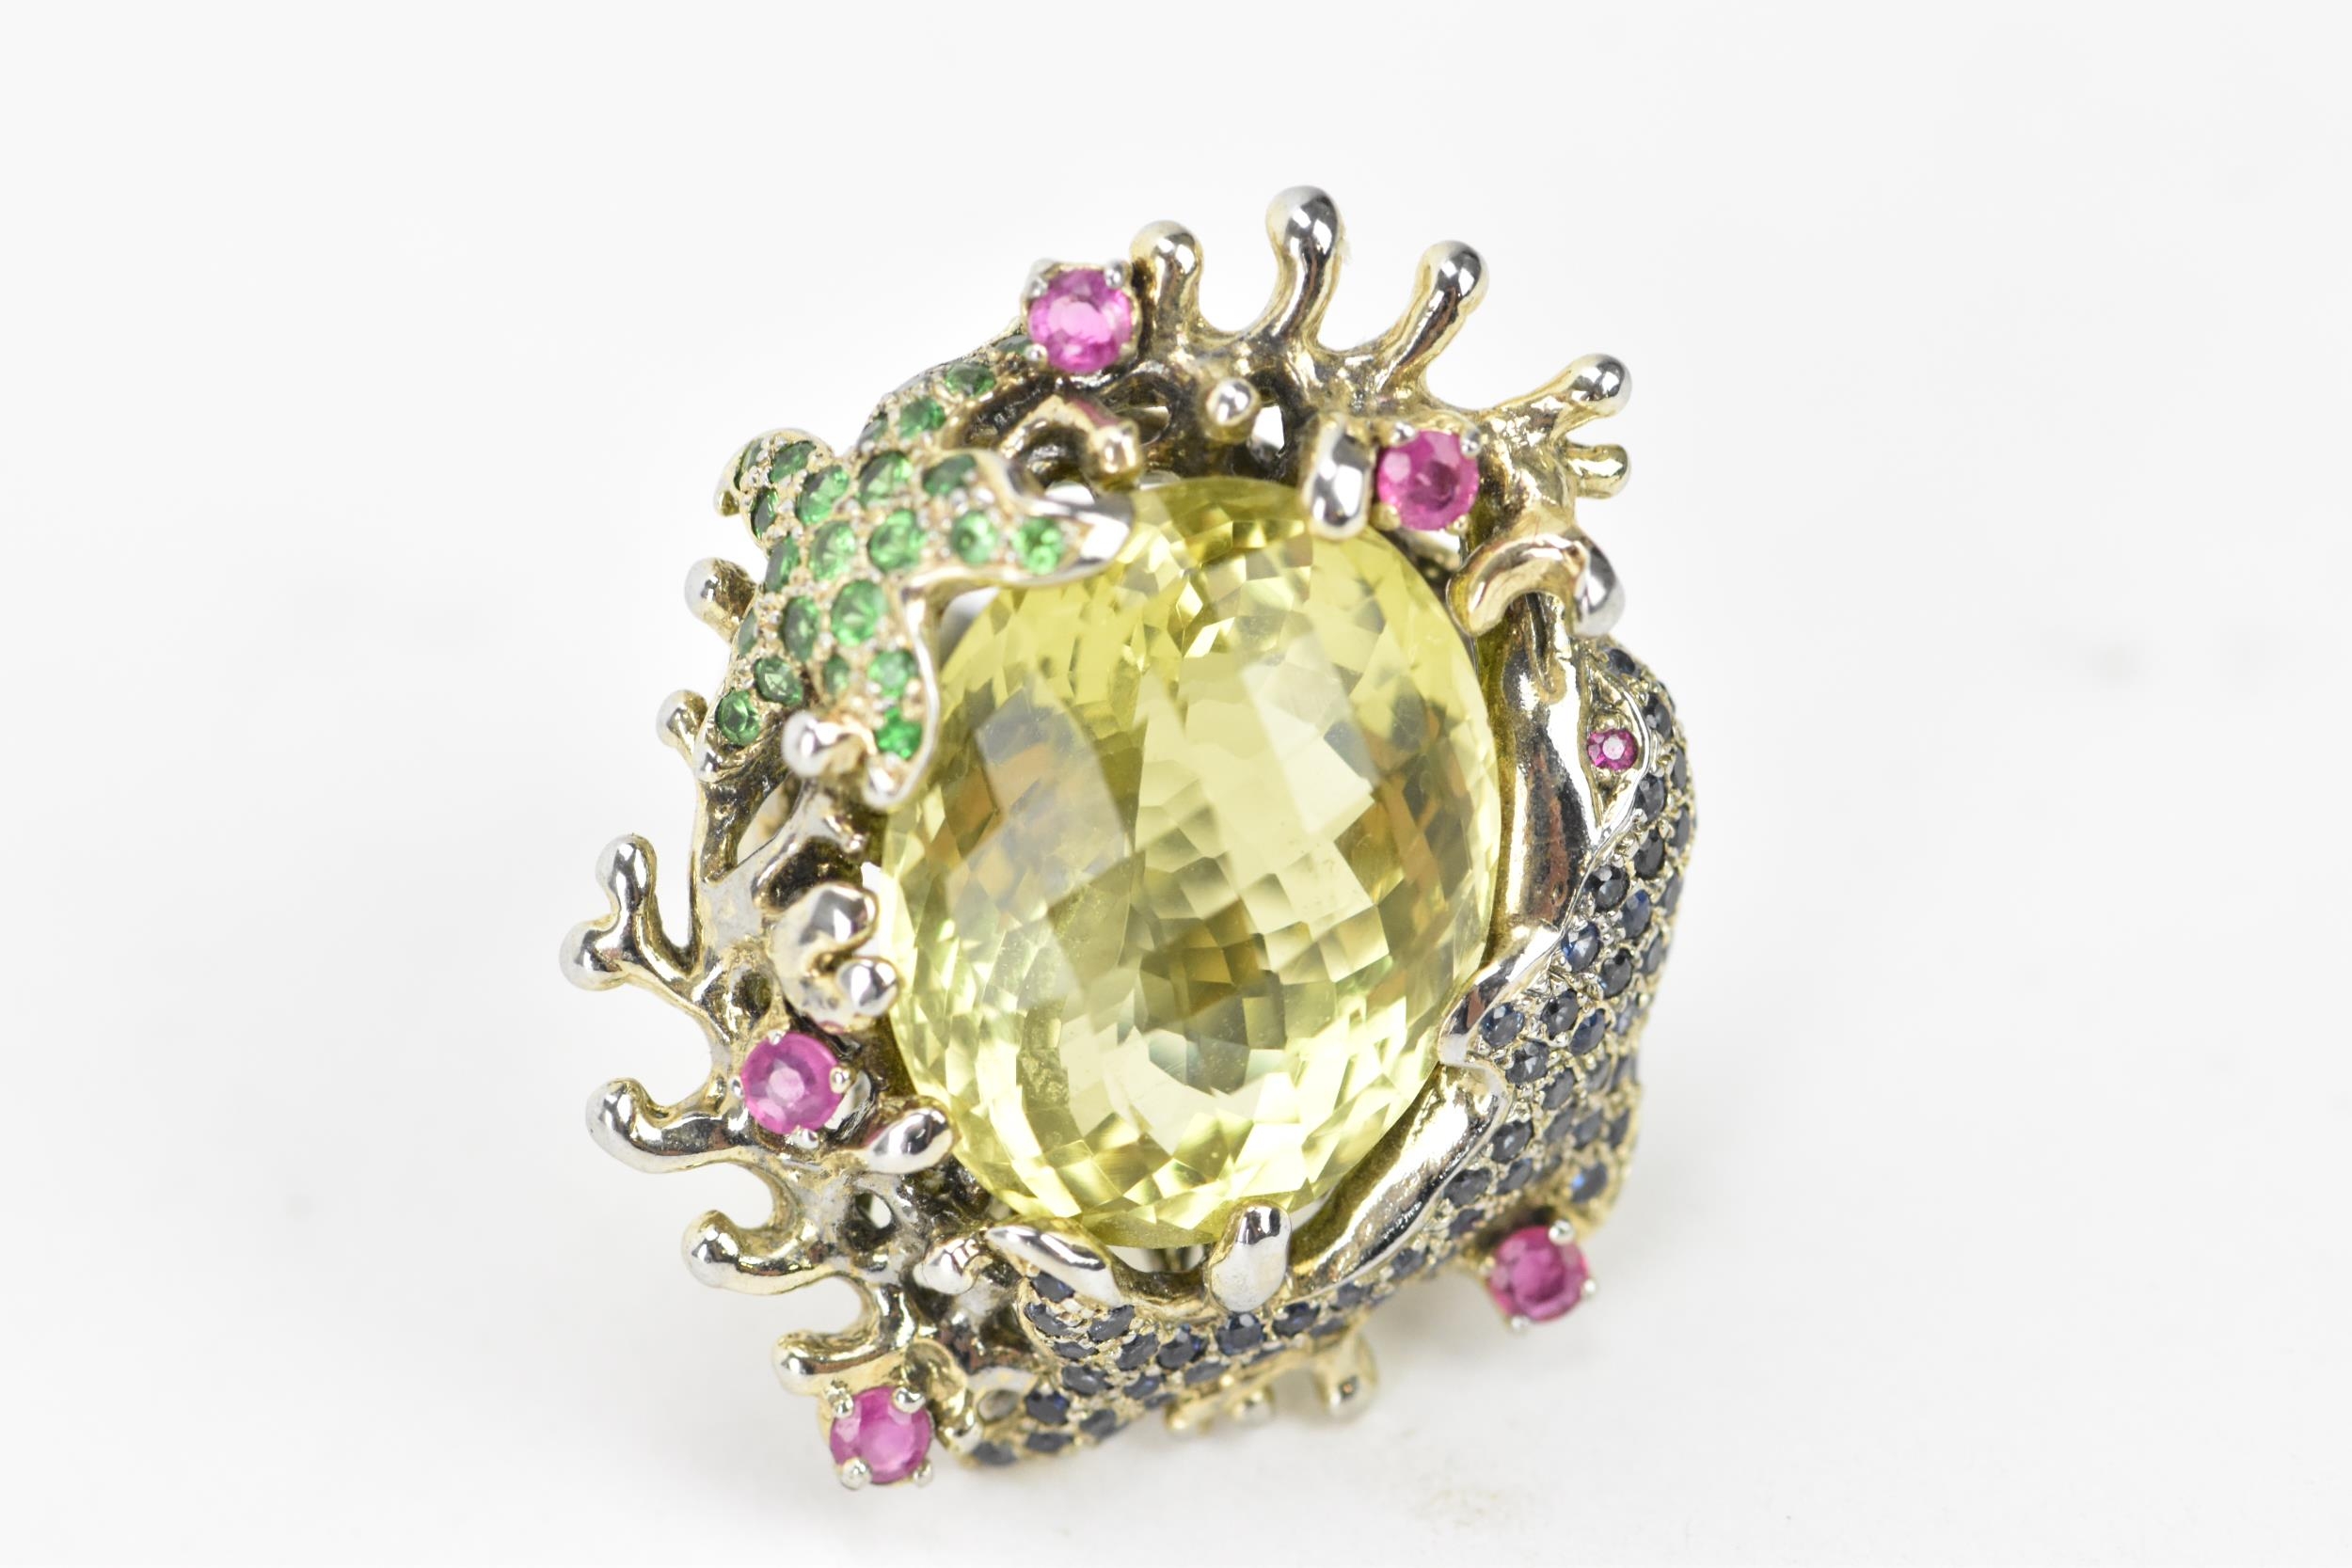 A silver dress ring inset with a large lemon quartz to the centre, decorated with a dolphin and